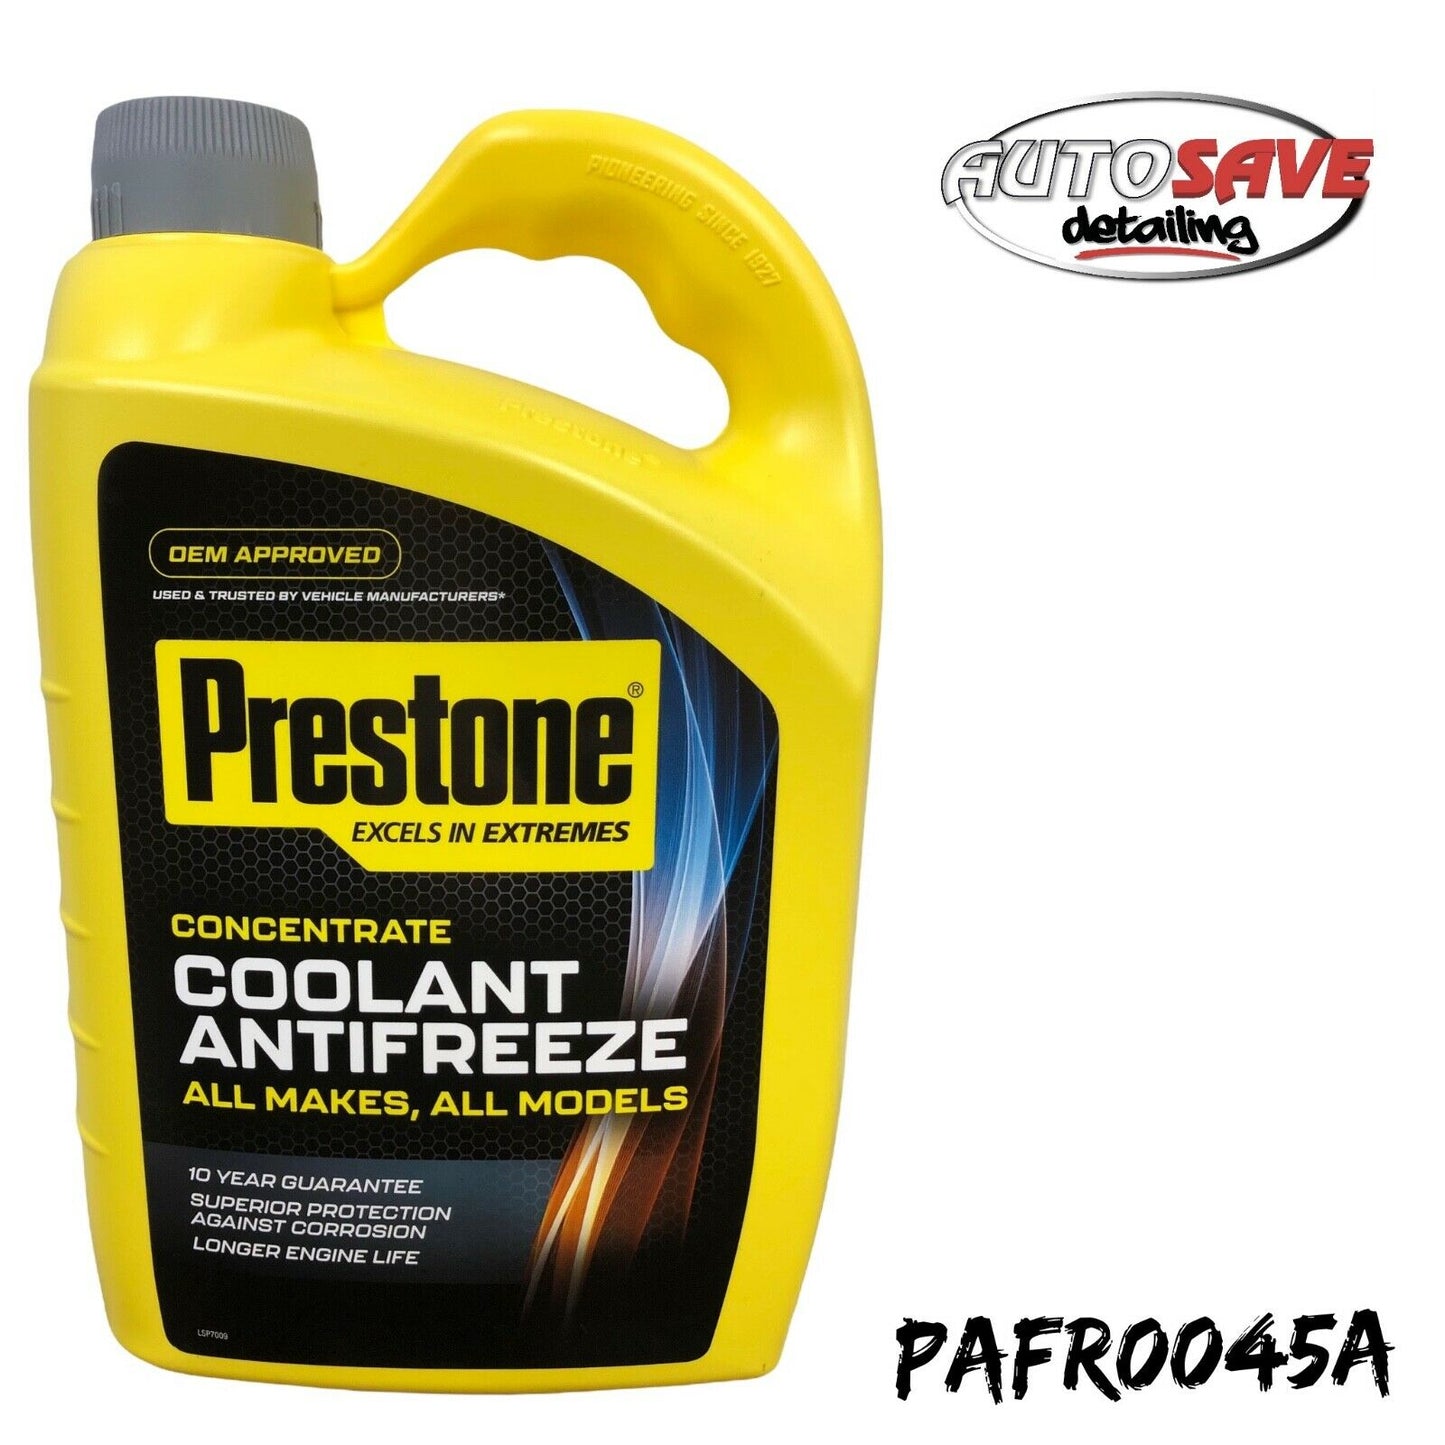 Prestone Concentrated Universal Anti Freeze Coolant Mixes With Any Antifreeze